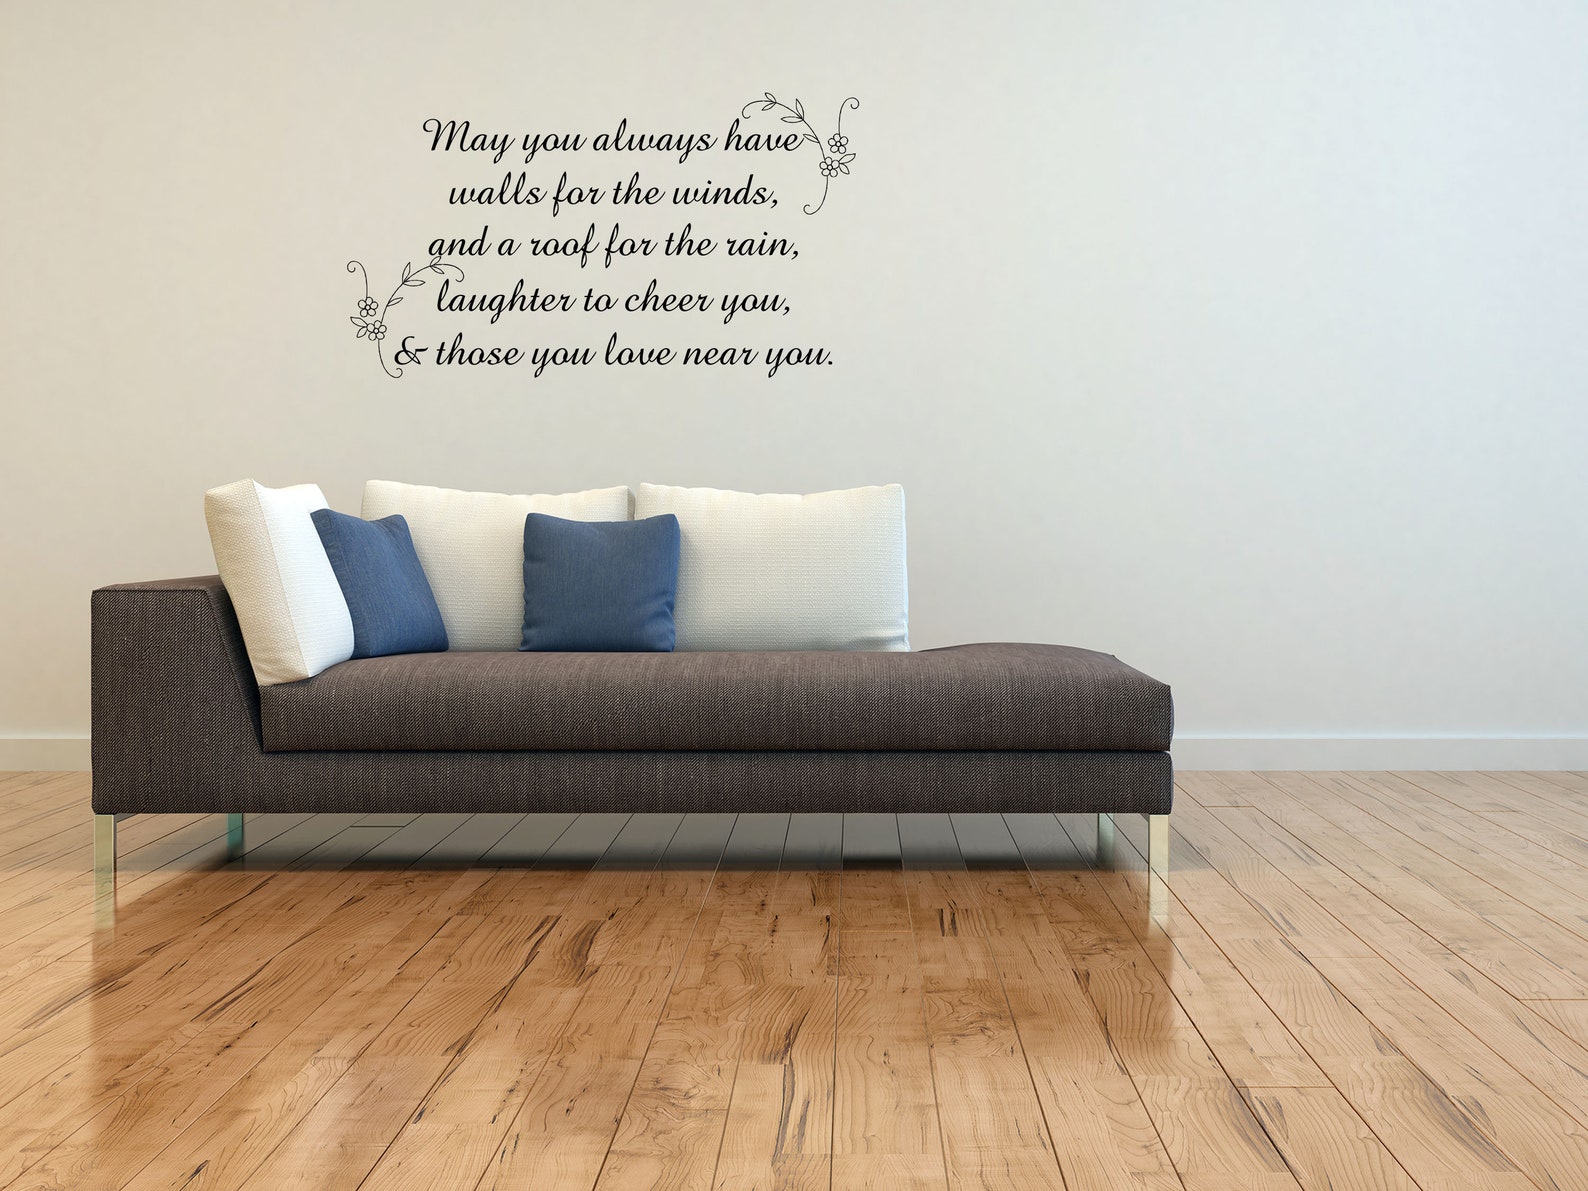 Irish Blessing Vinyl Decal Lettering May You Always Have - Etsy